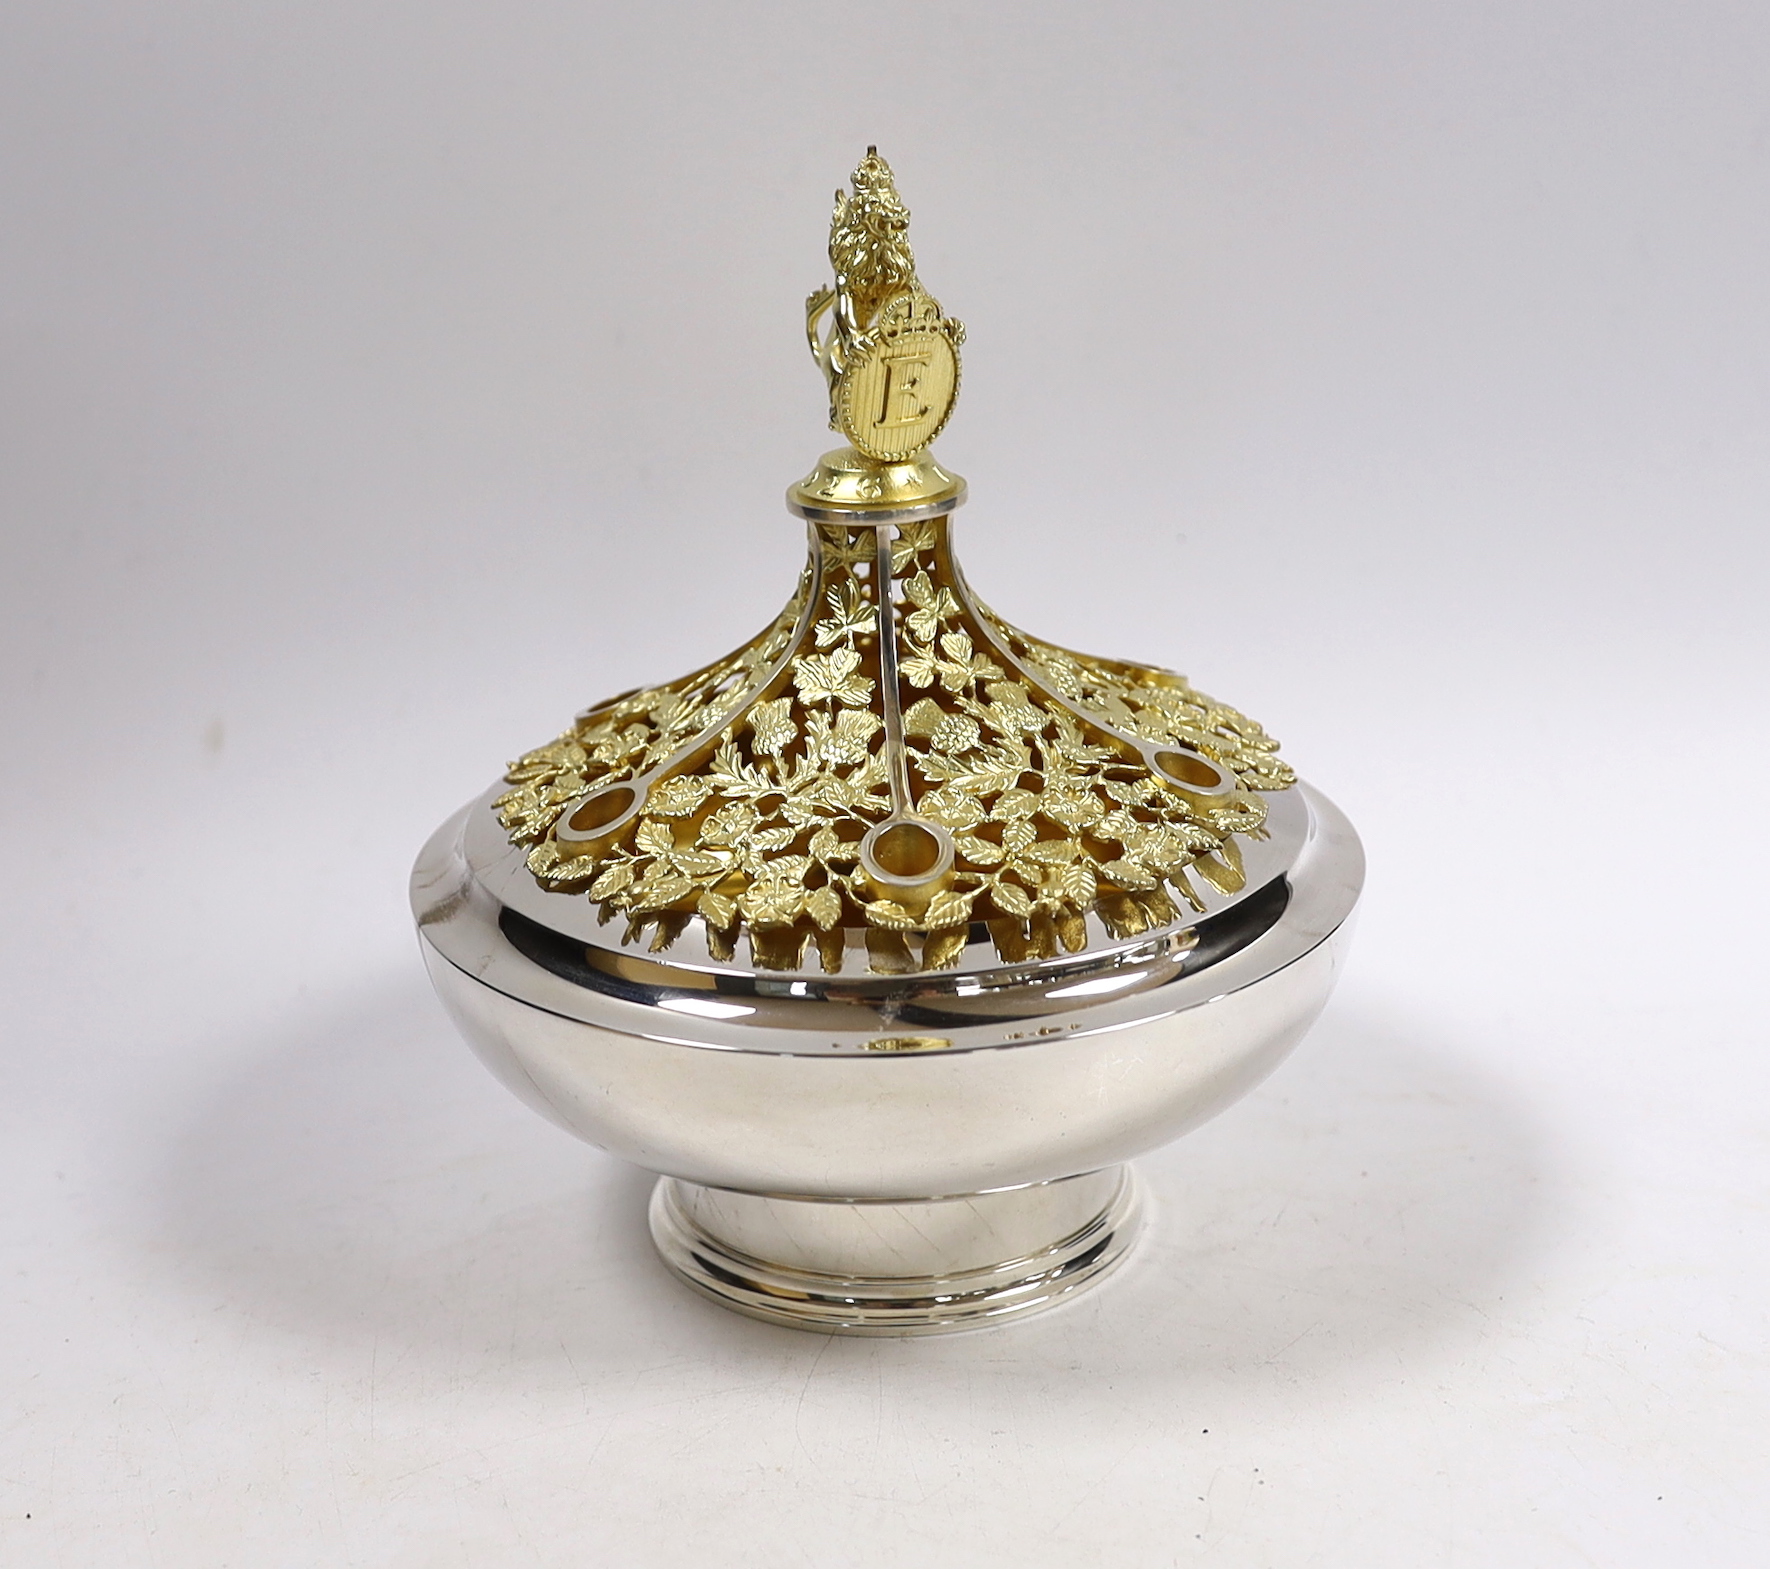 A modern Hector Miller for Aurum parcel gilt silver Bowes-Lyon commemorative bowl and cover, London, 1986, height 18.4cm, 18.7oz.